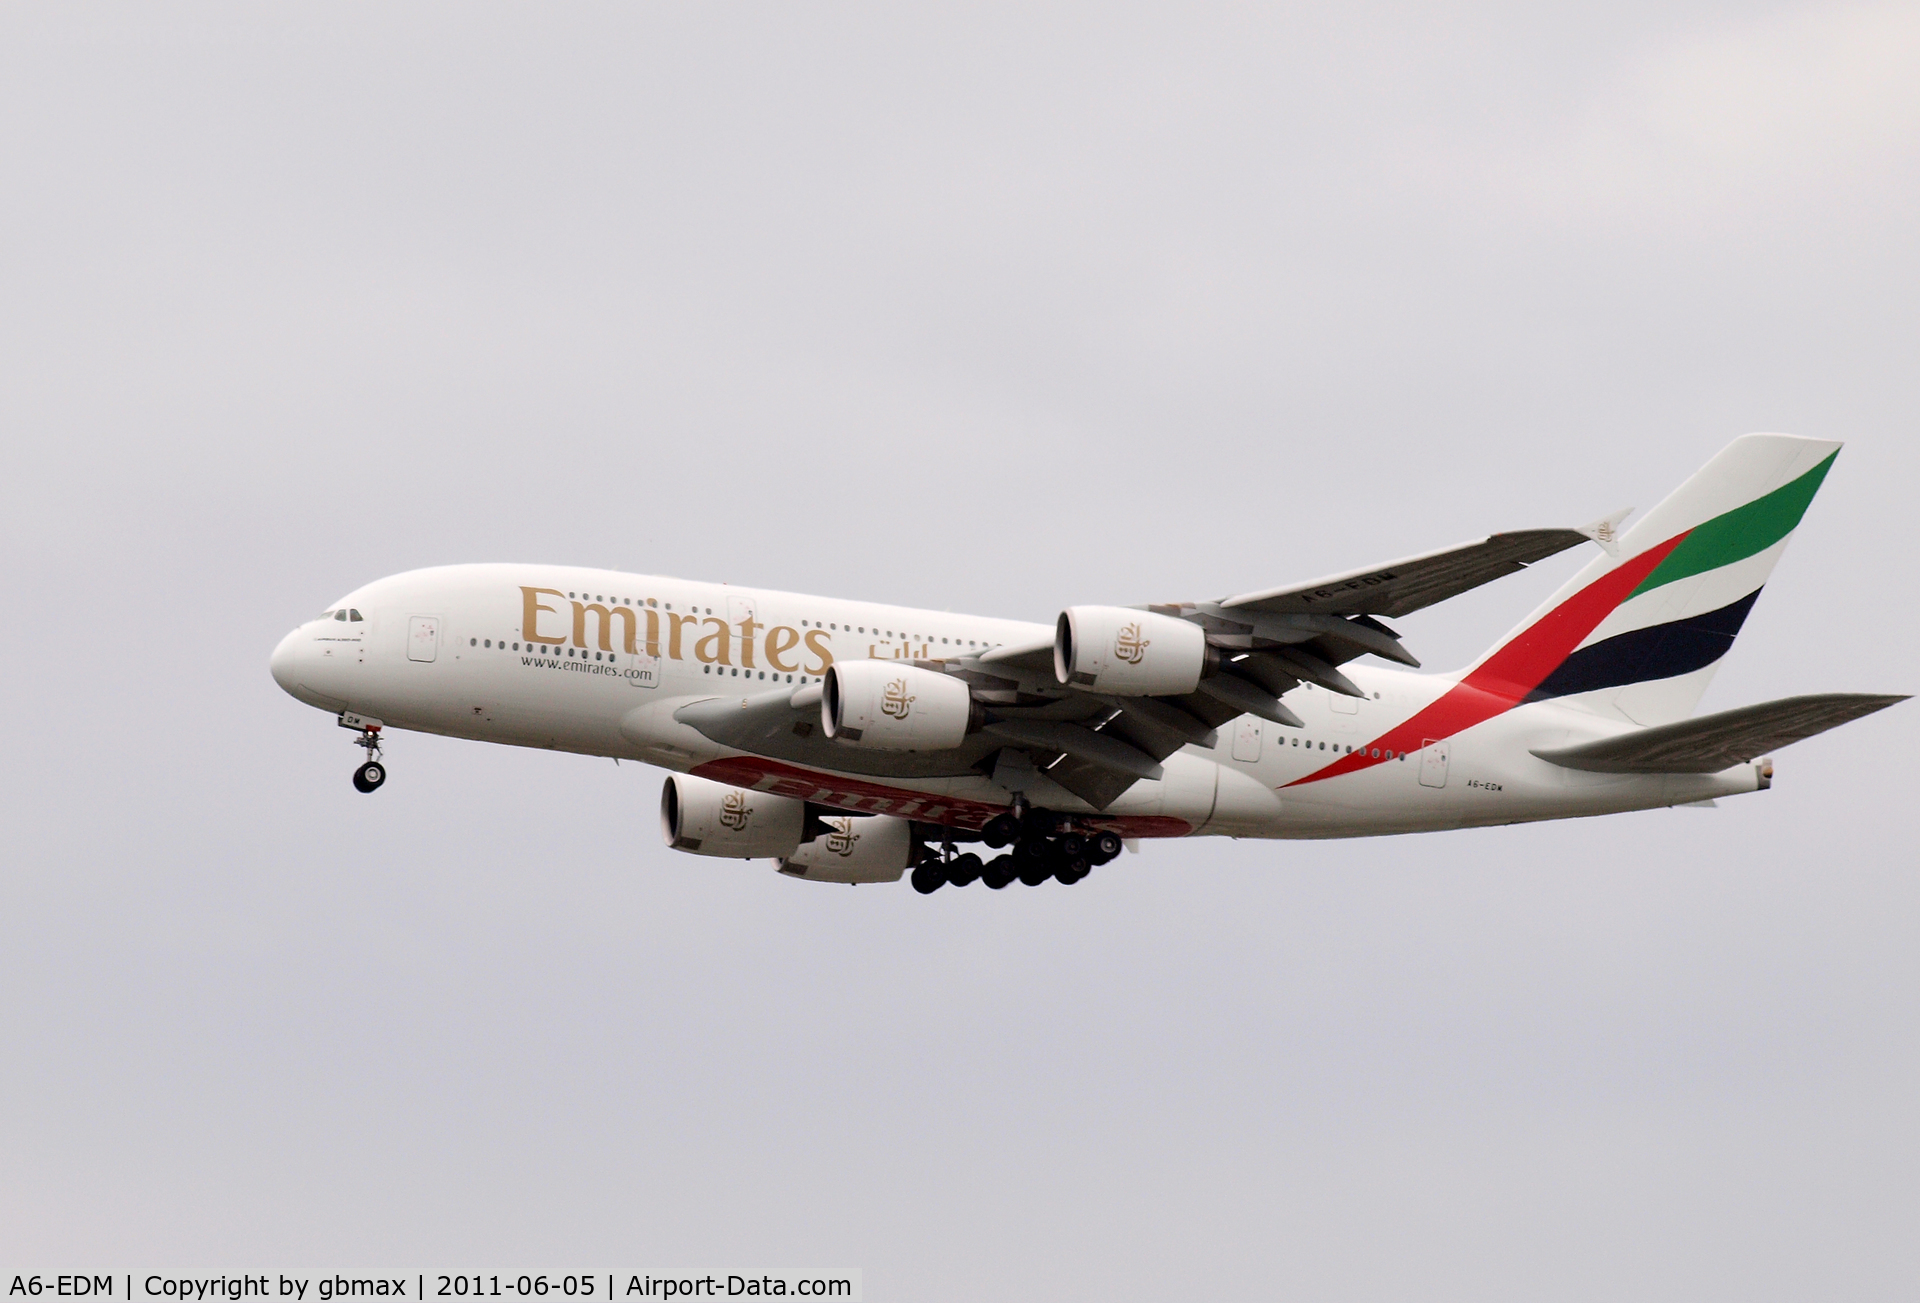 A6-EDM, 2010 Airbus A380-861 C/N 042, Going to a landing at JFK